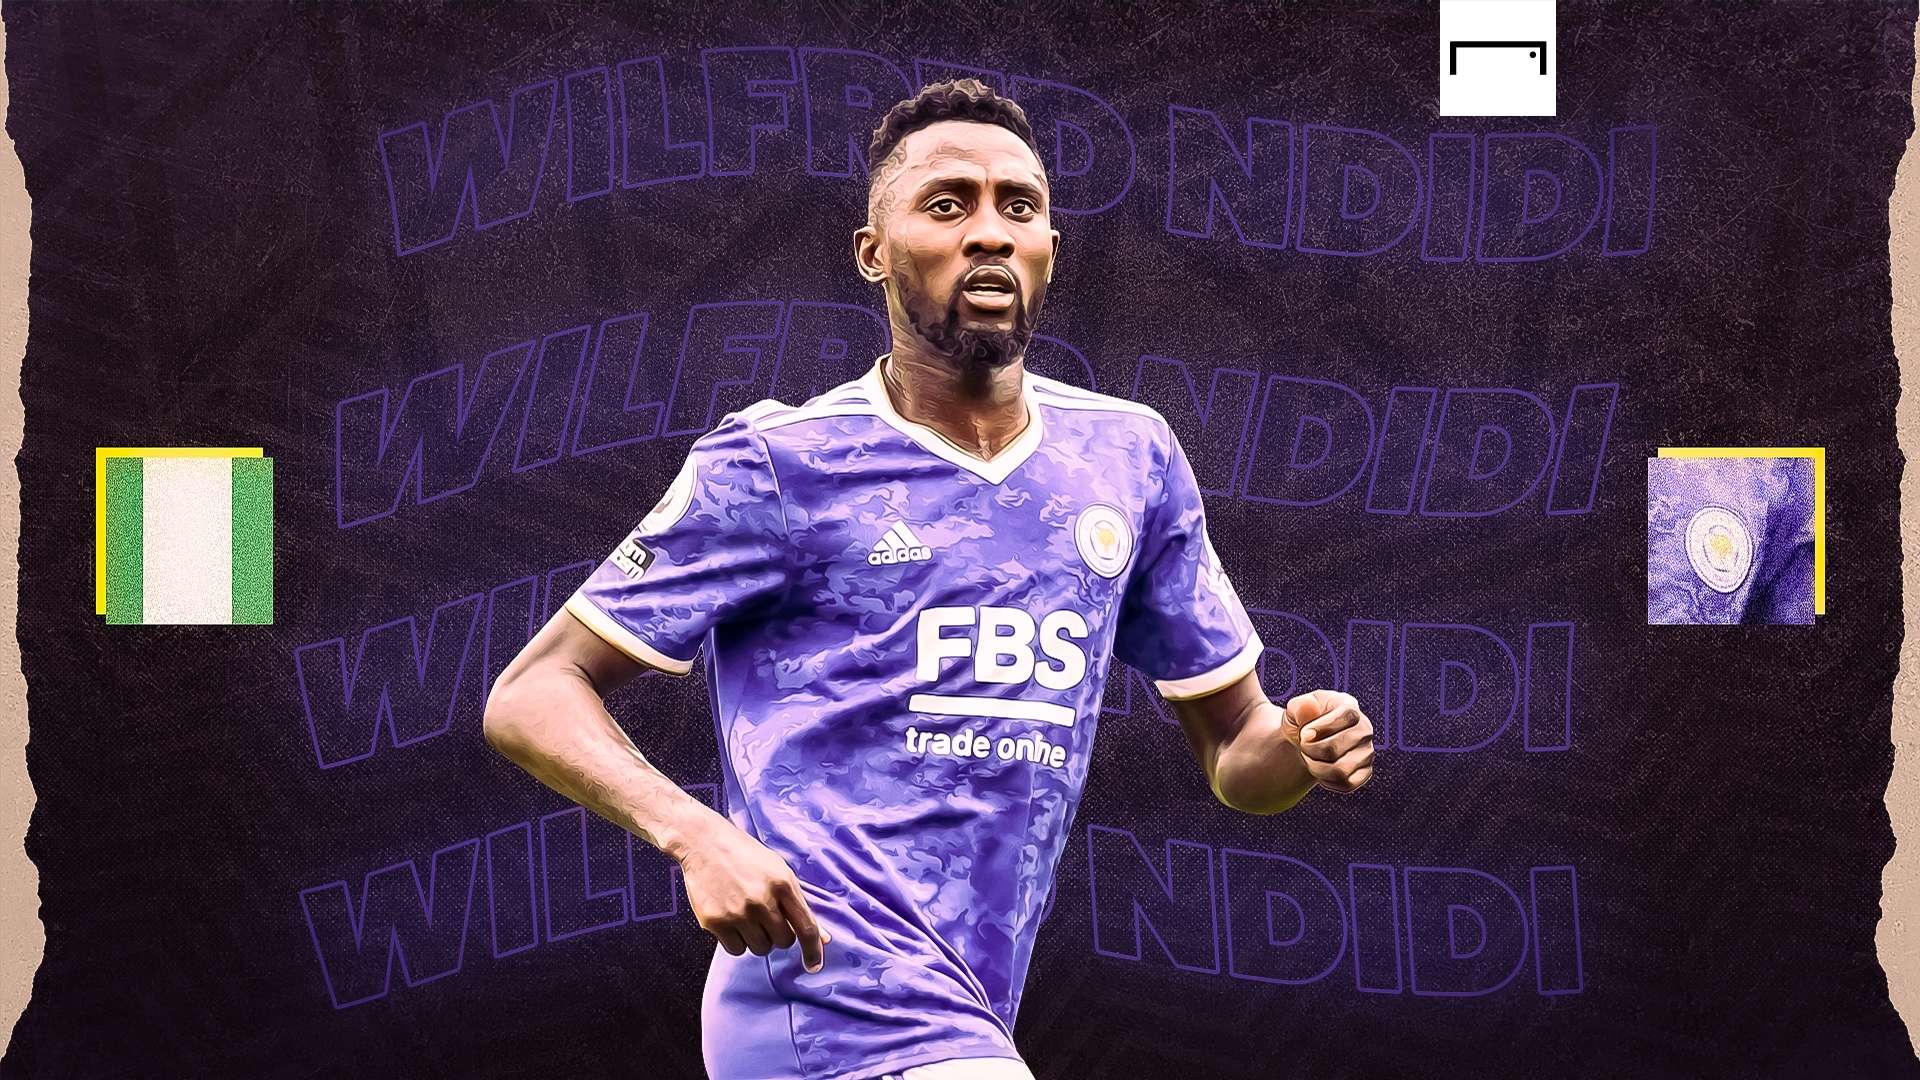 Wilfred Ndidi - What does the future hold